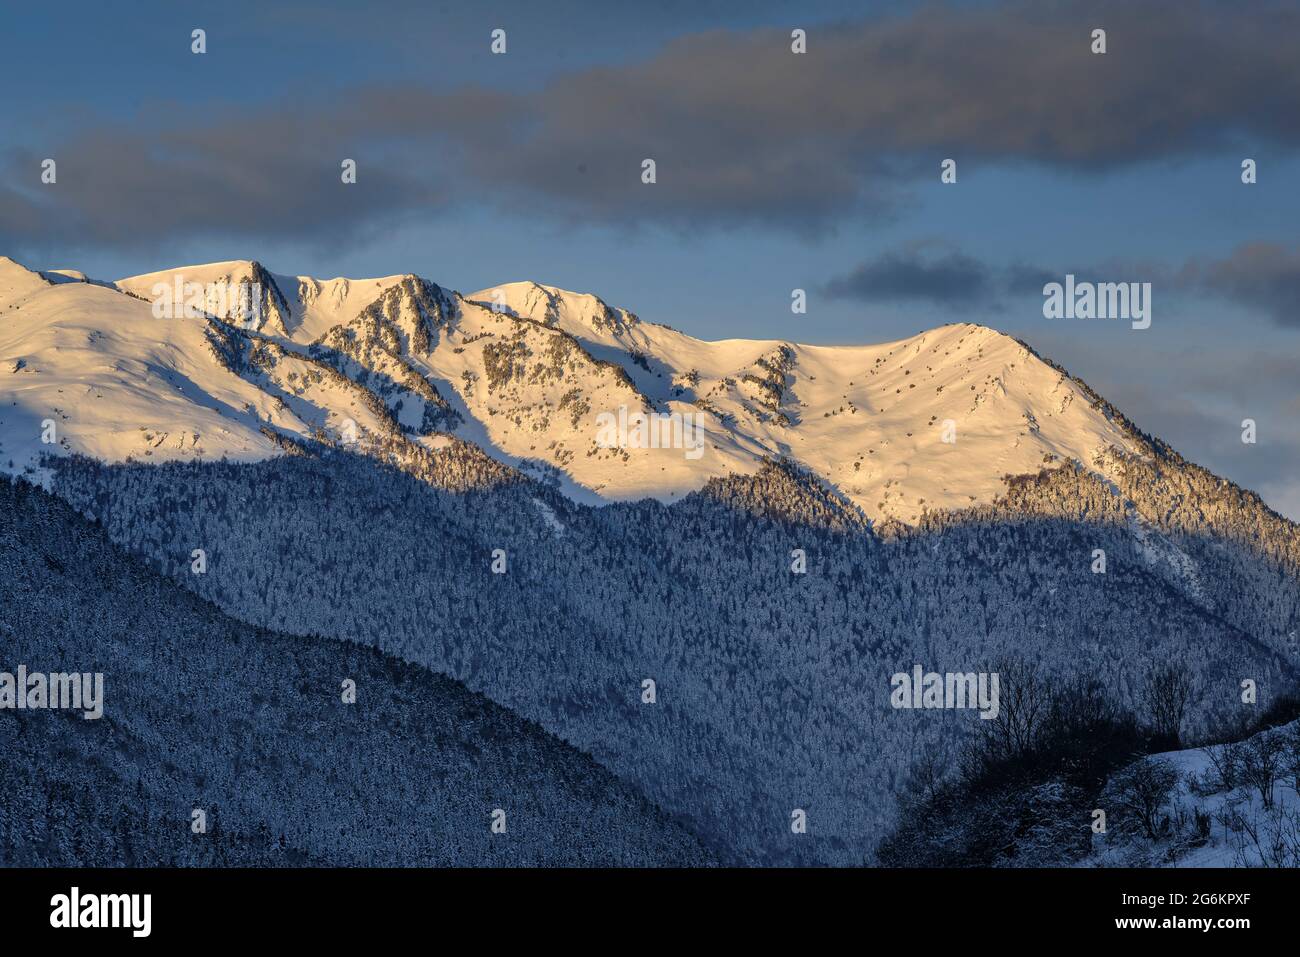 Aran Valley in a winter sunrise after a snowfall, seen from the village of Mont (Aran Valley, Catalonia, Spain, Pyrenees) Stock Photo